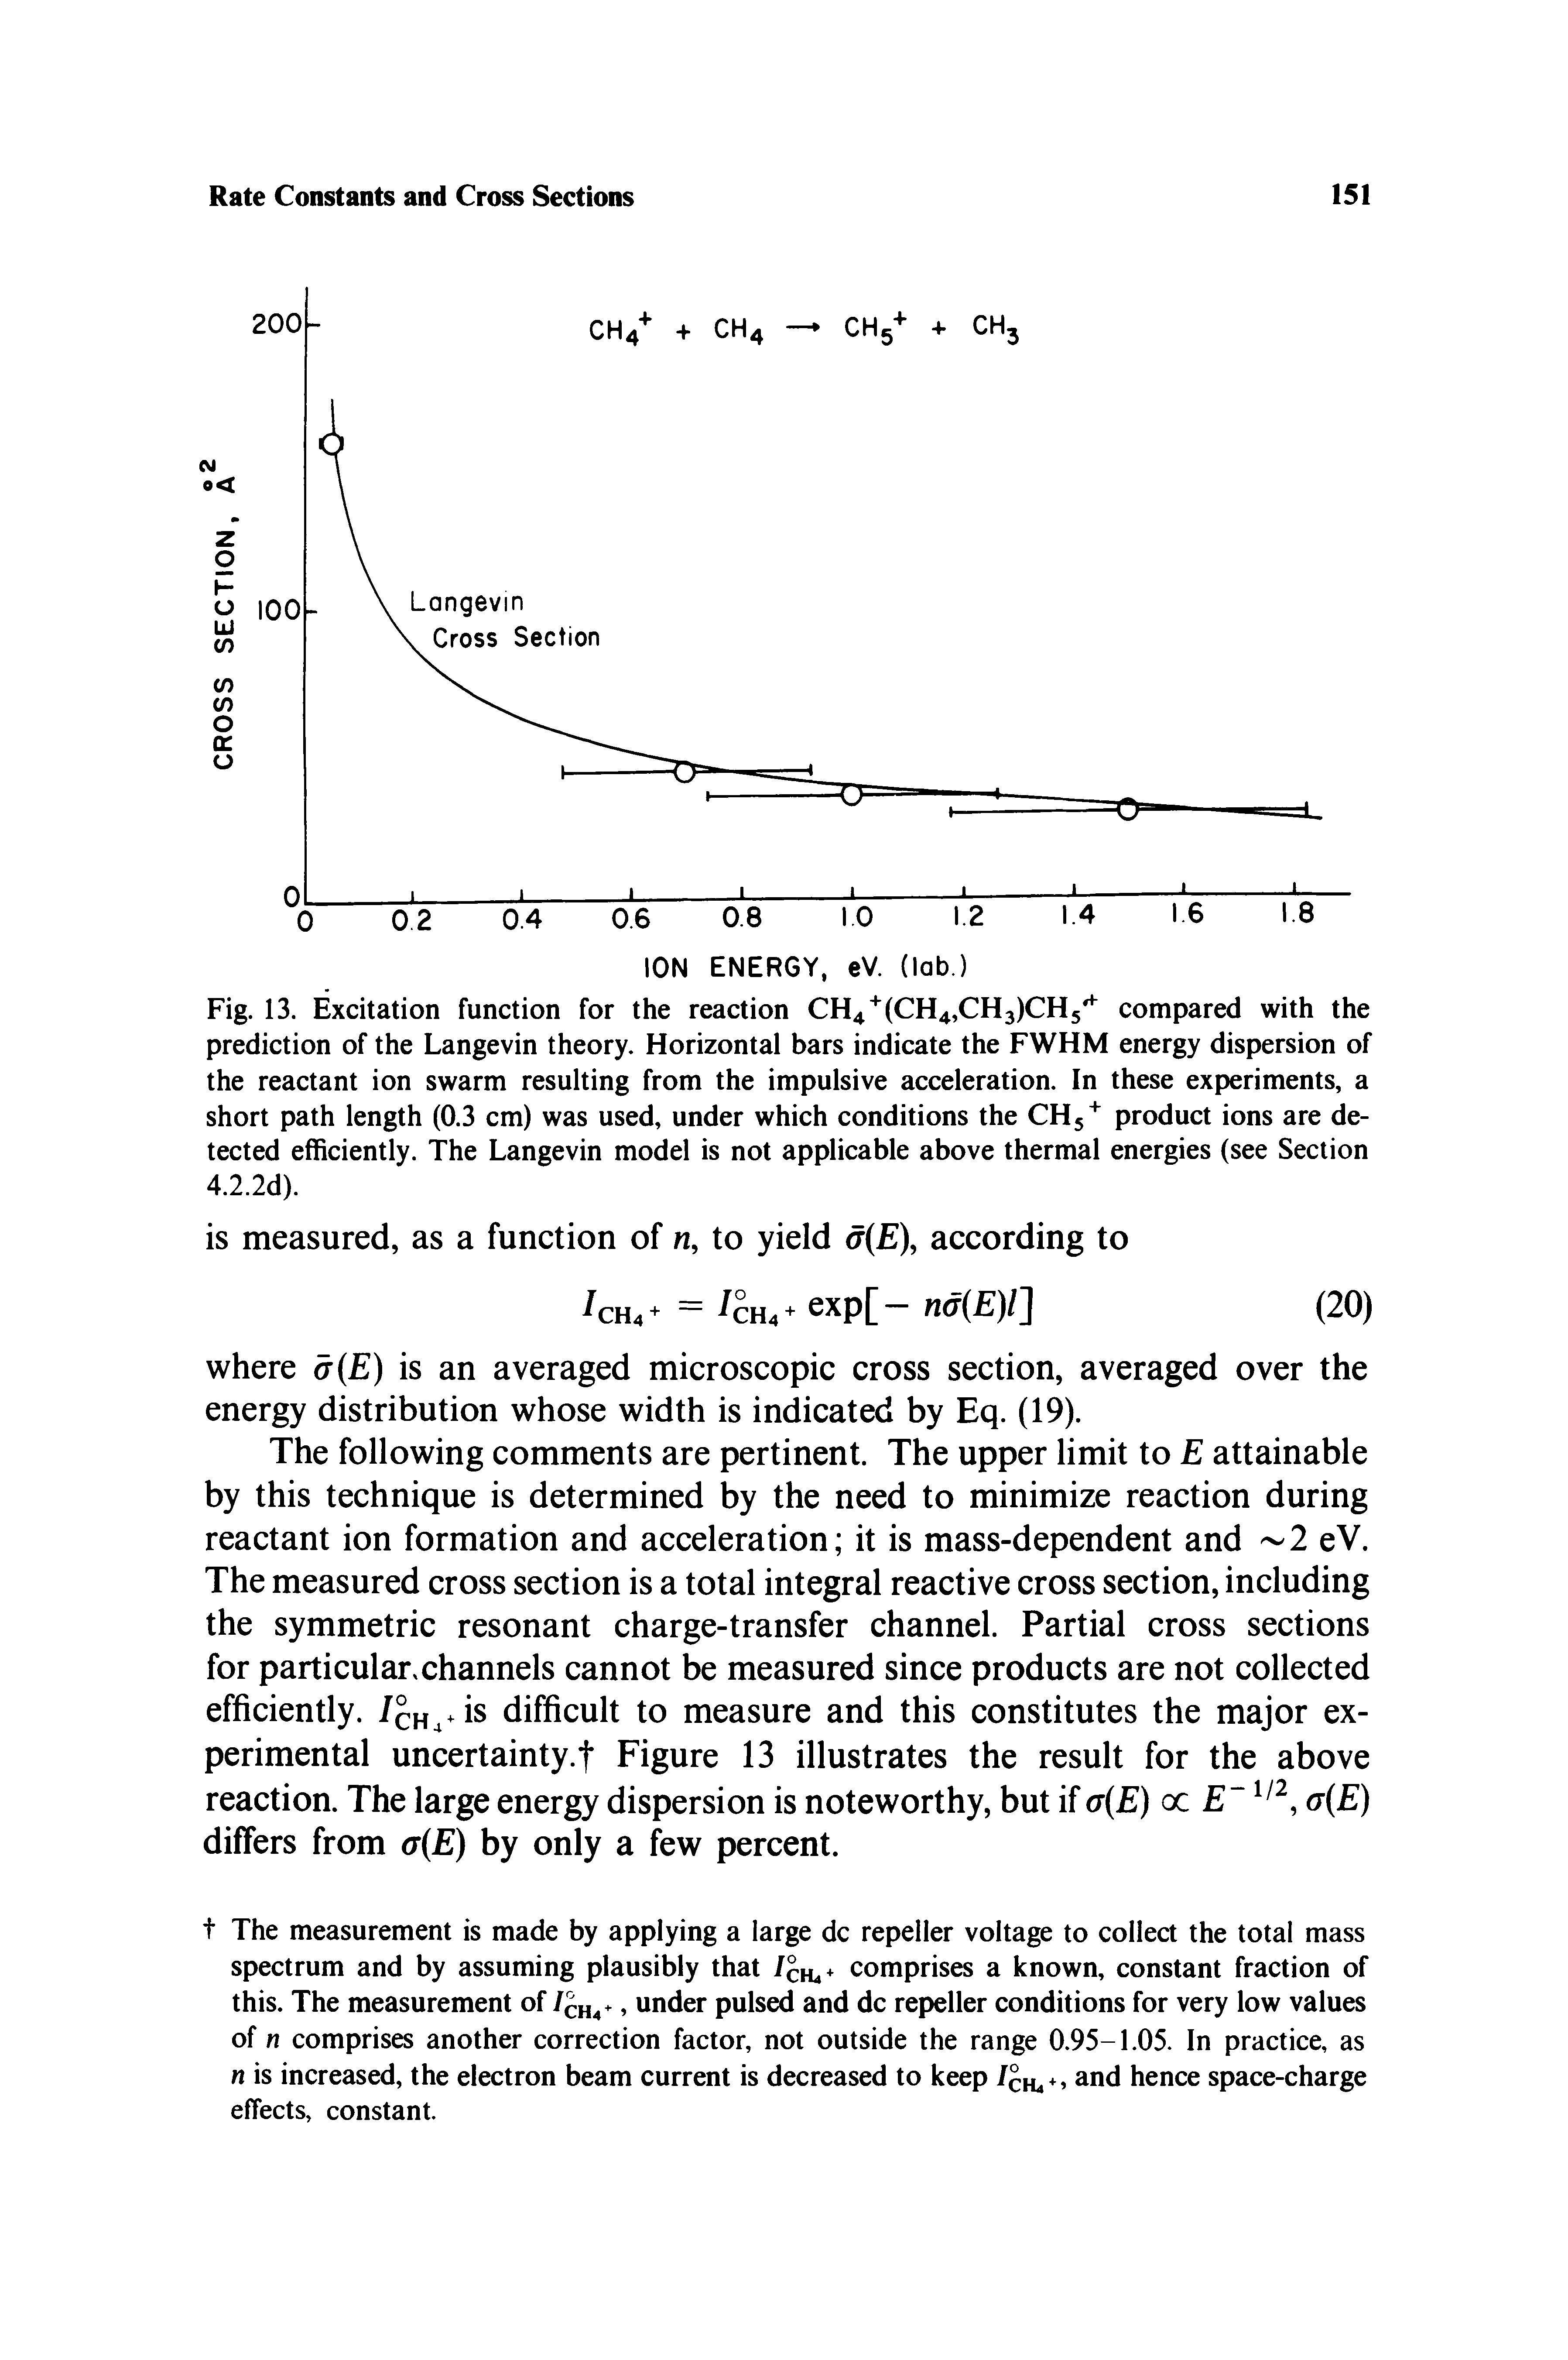 Fig. 13. Excitation function for the reaction CH4 (CH4,CH3)CH5 compared with the prediction of the Langevin theory. Horizontal bars indicate the FWHM energy dispersion of the reactant ion swarm resulting from the impulsive acceleration. In these experiments, a short path length (0.3 cm) was used, under which conditions the CHj product ions are detected efficiently. The Langevin model is not applicable above thermal energies (see Section 4.2.2d).